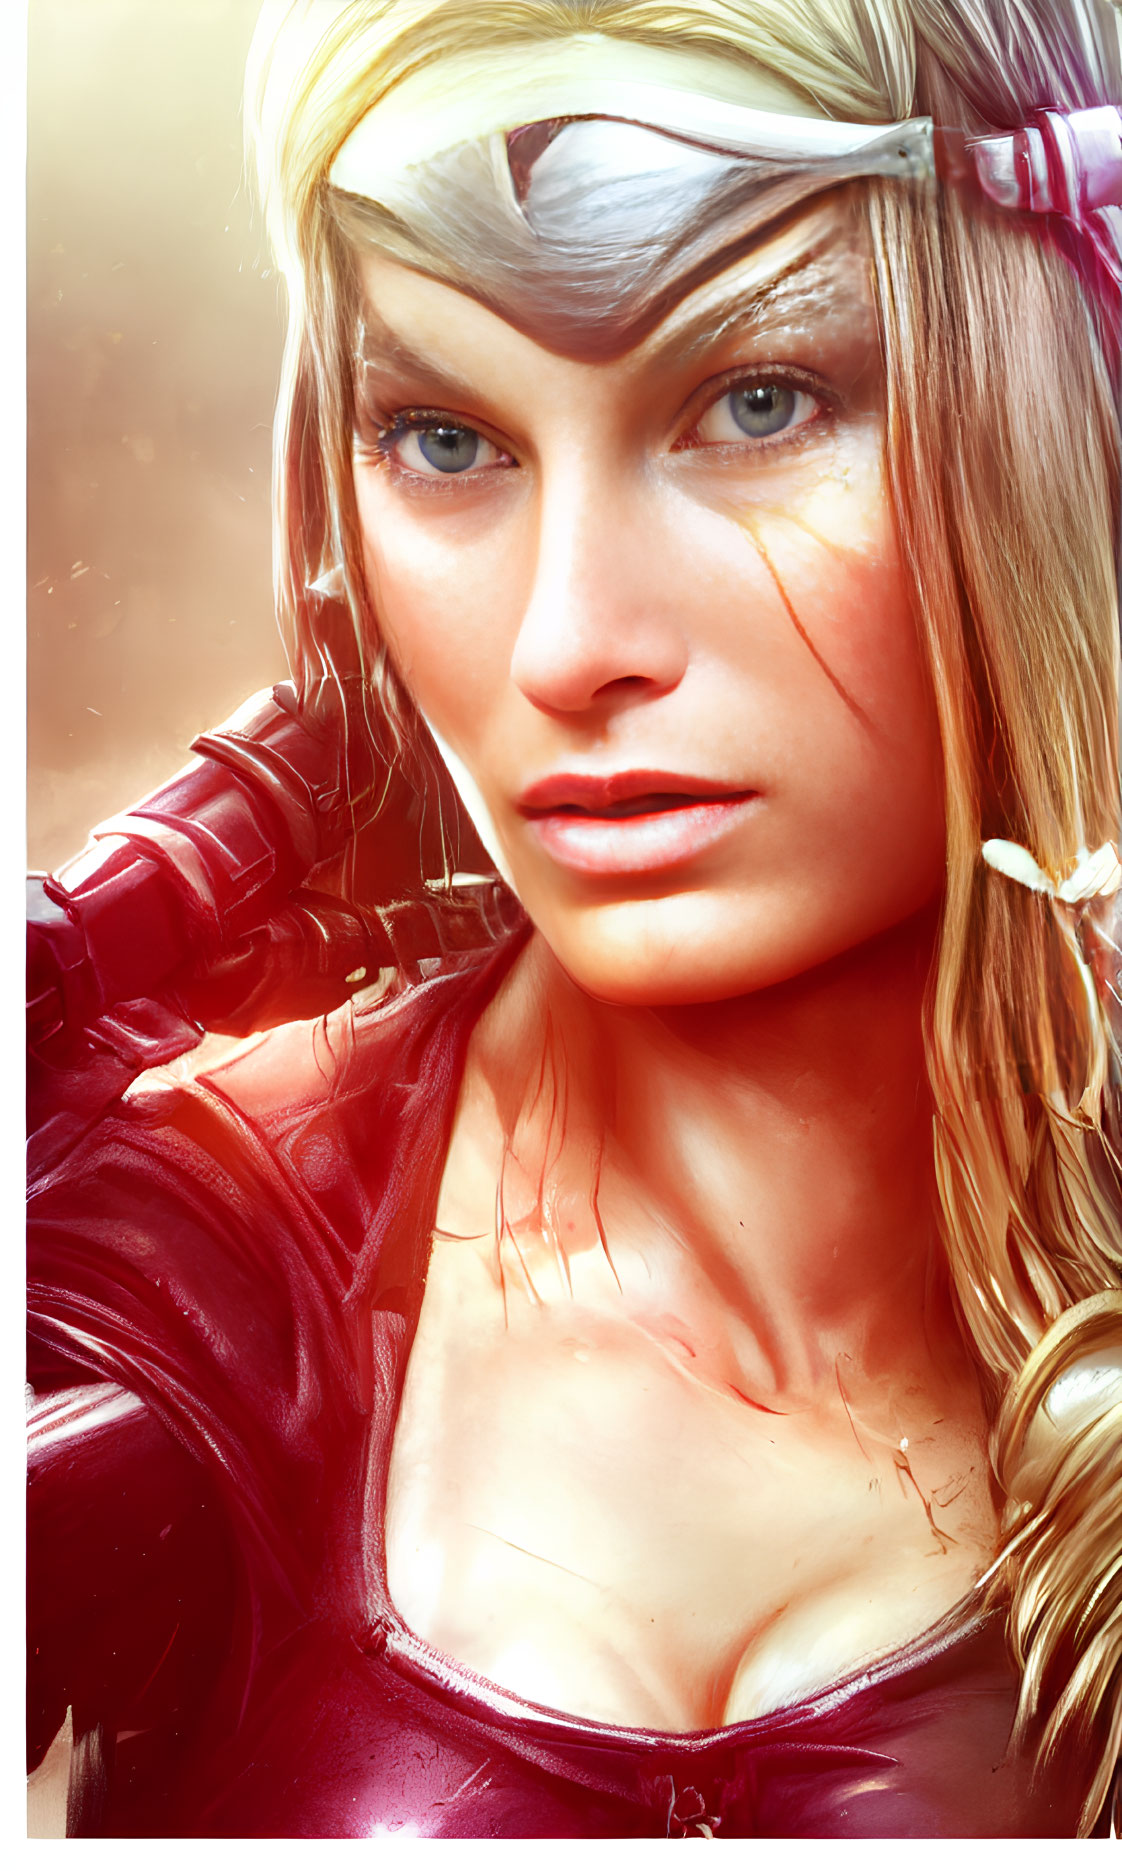 Blonde woman with eyepatch in red armor, detailed facial features